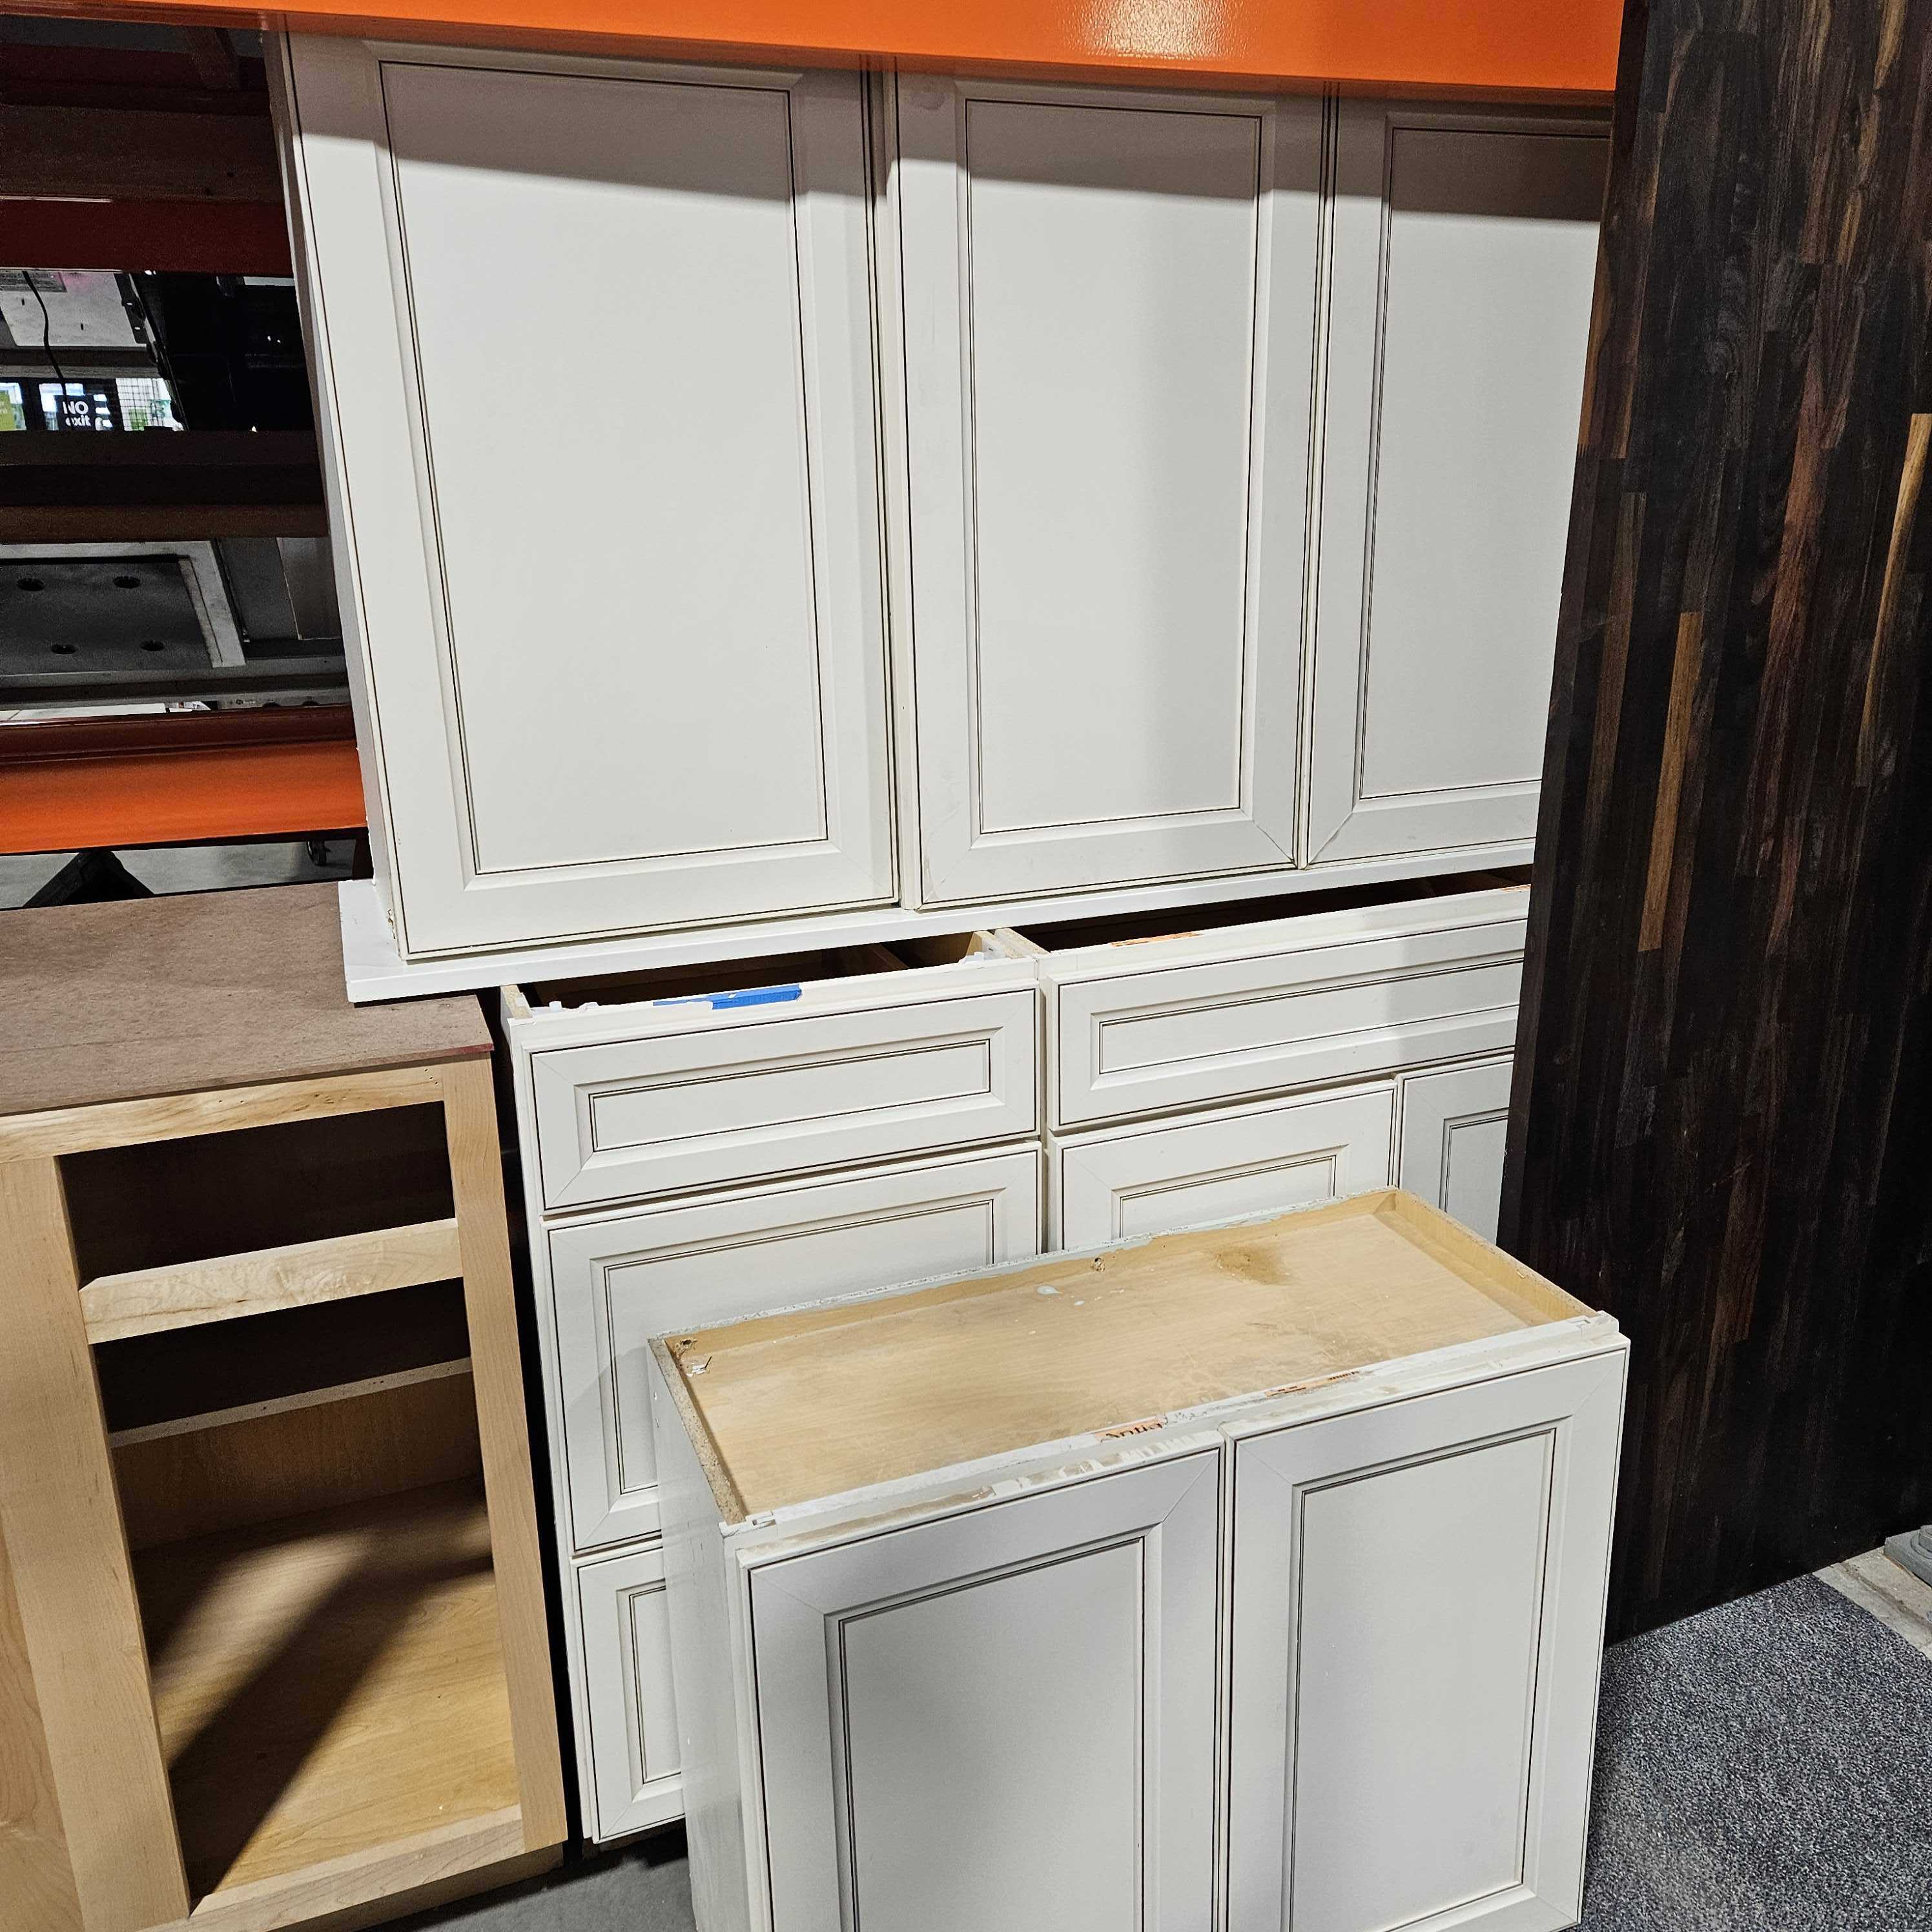 5 Piece 2 Lowers 3 Uppers Cream Colored Glazed Cabinet Set